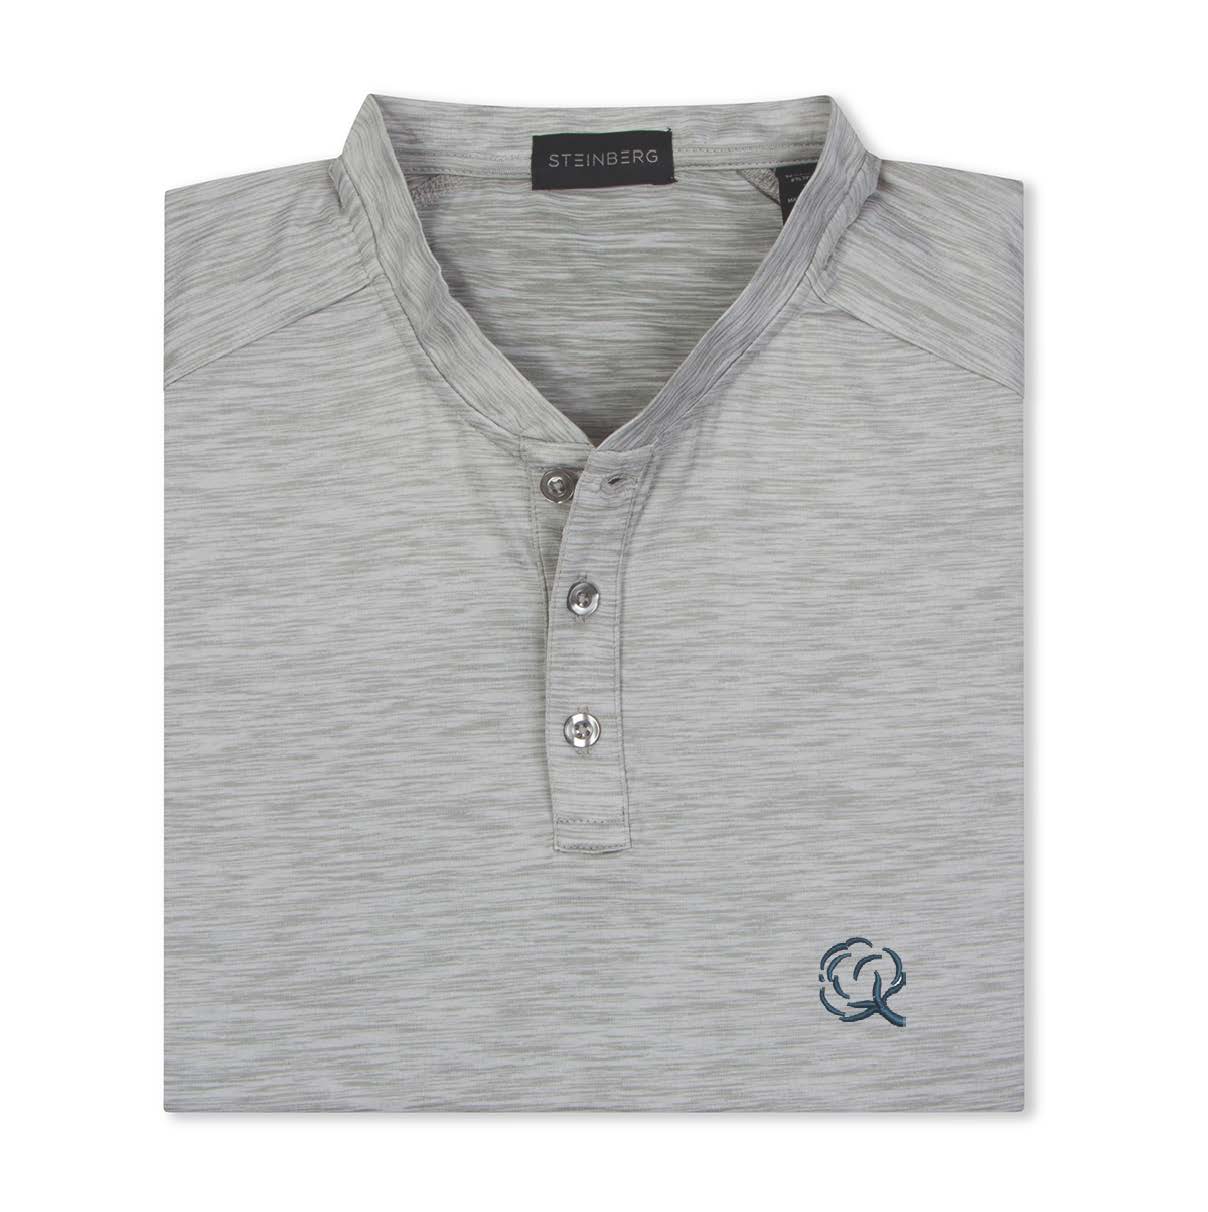 The Ace Performance Polo Cotton Collection